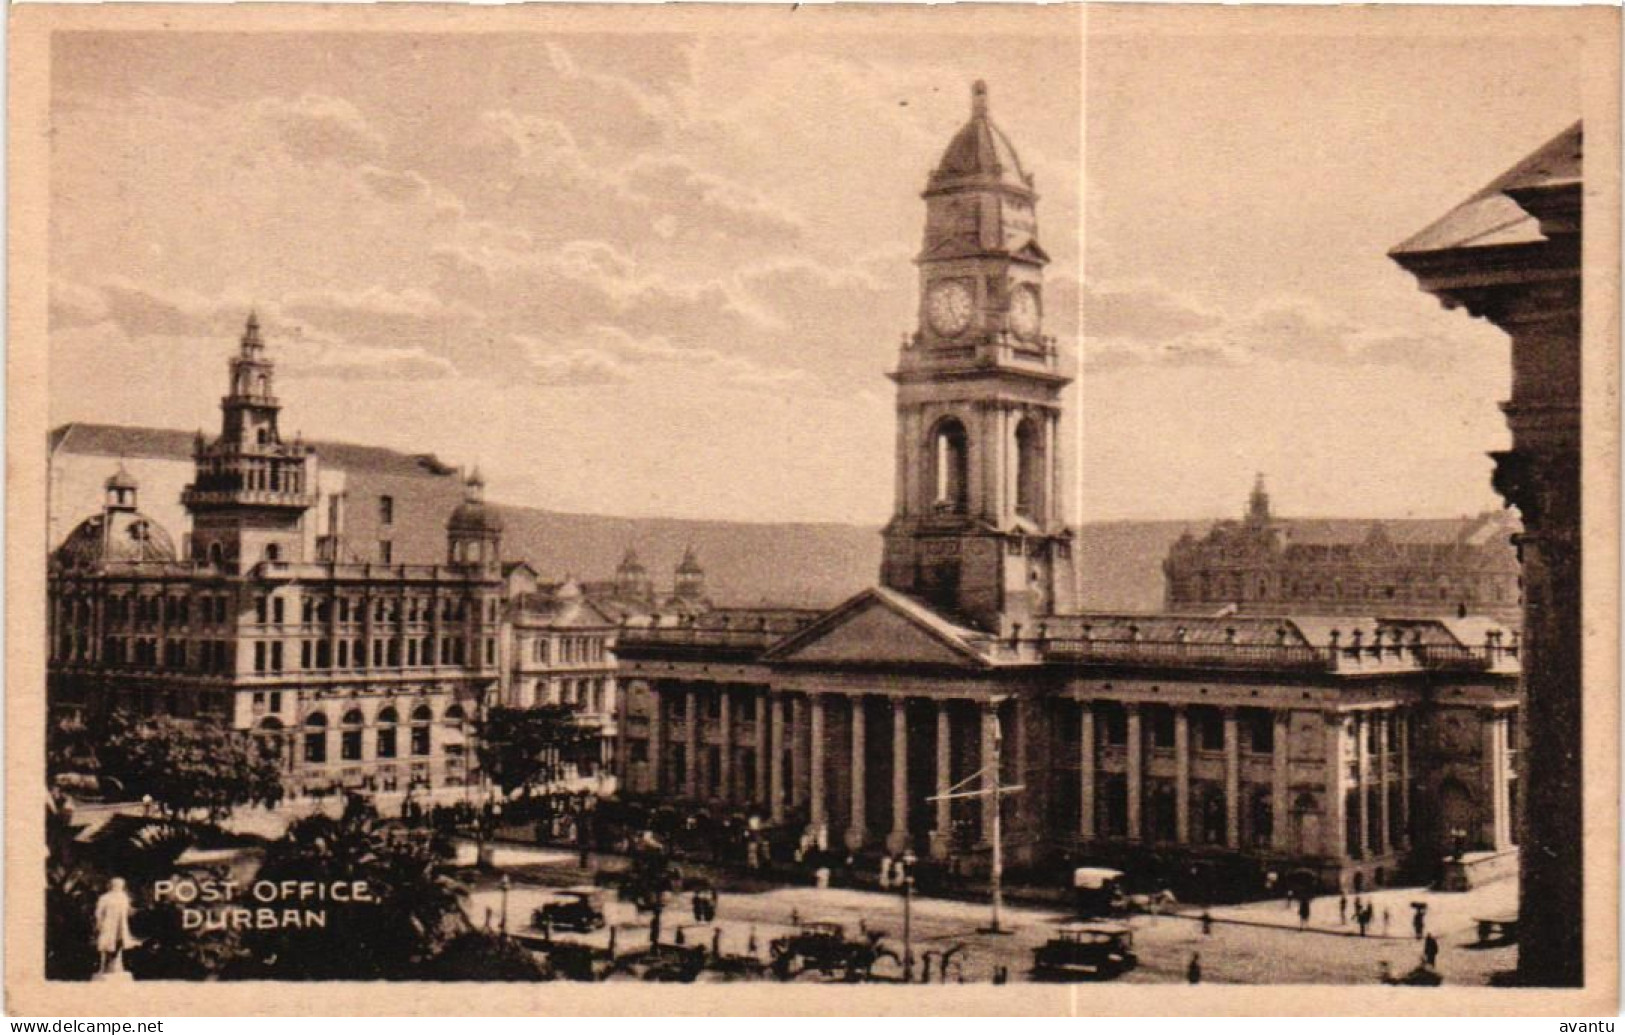 SOUTH AFRICA / DURBAN / POST OFFICE - South Africa